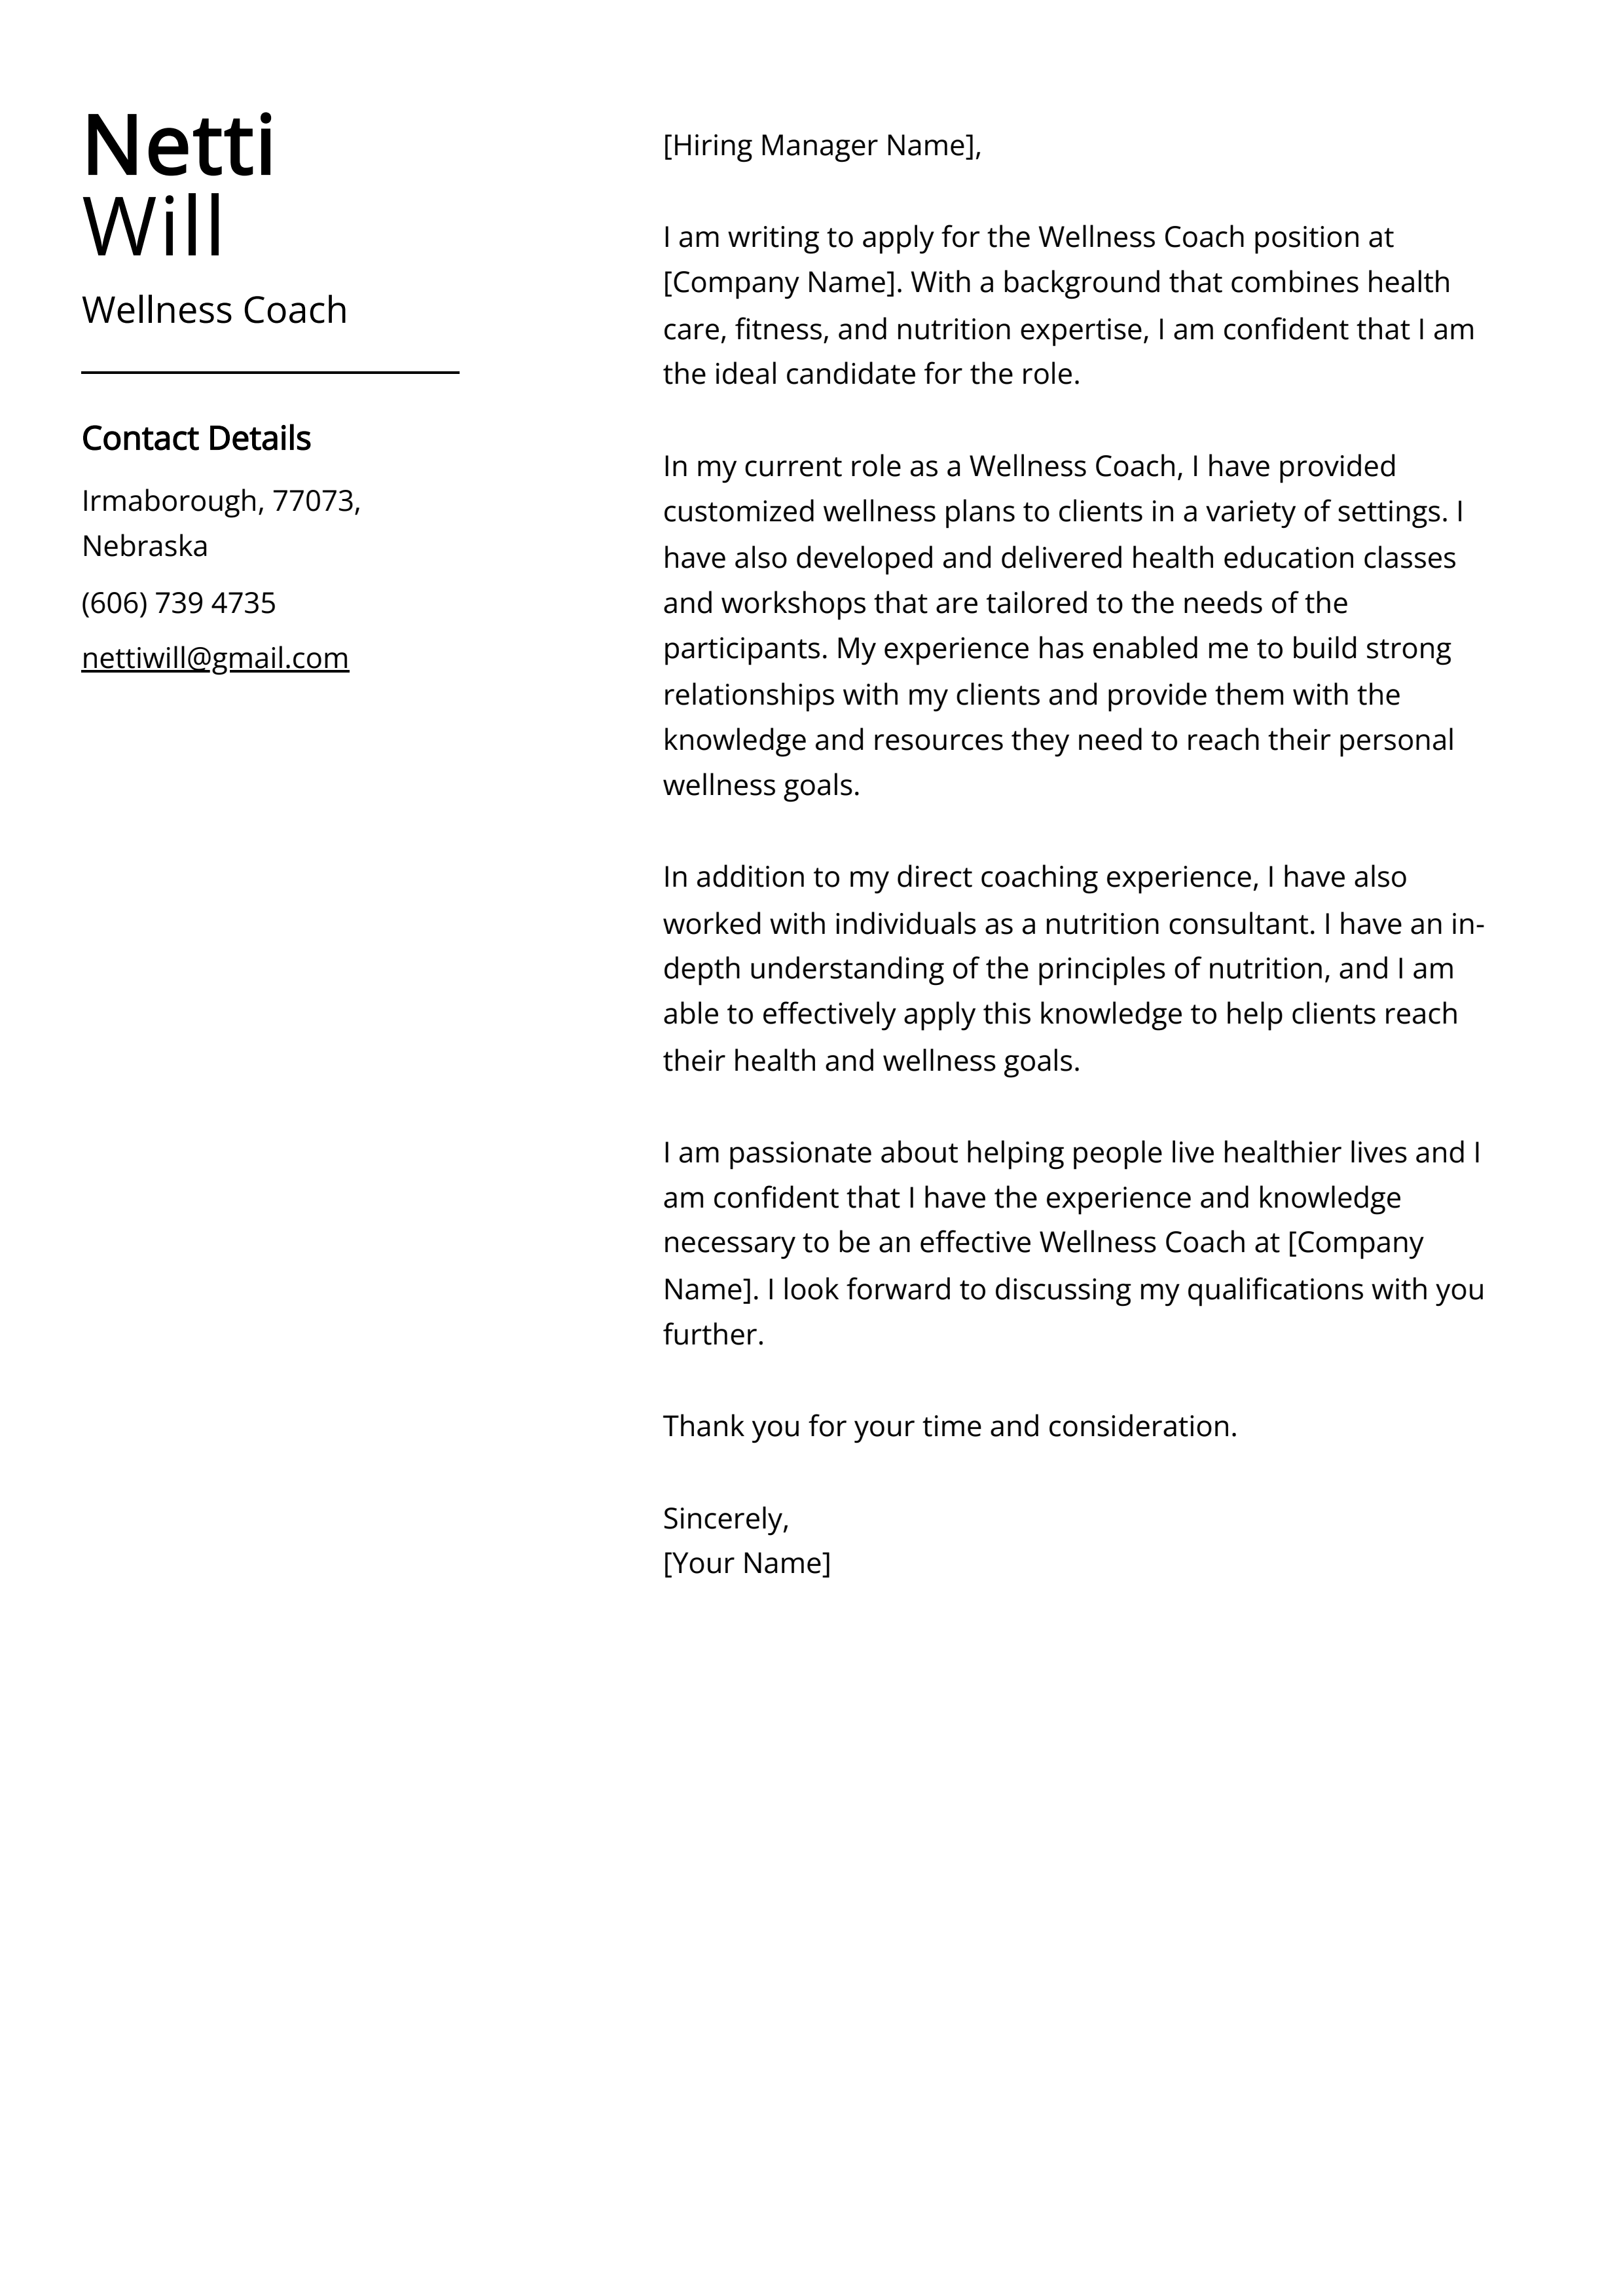 Wellness Coach Cover Letter Example